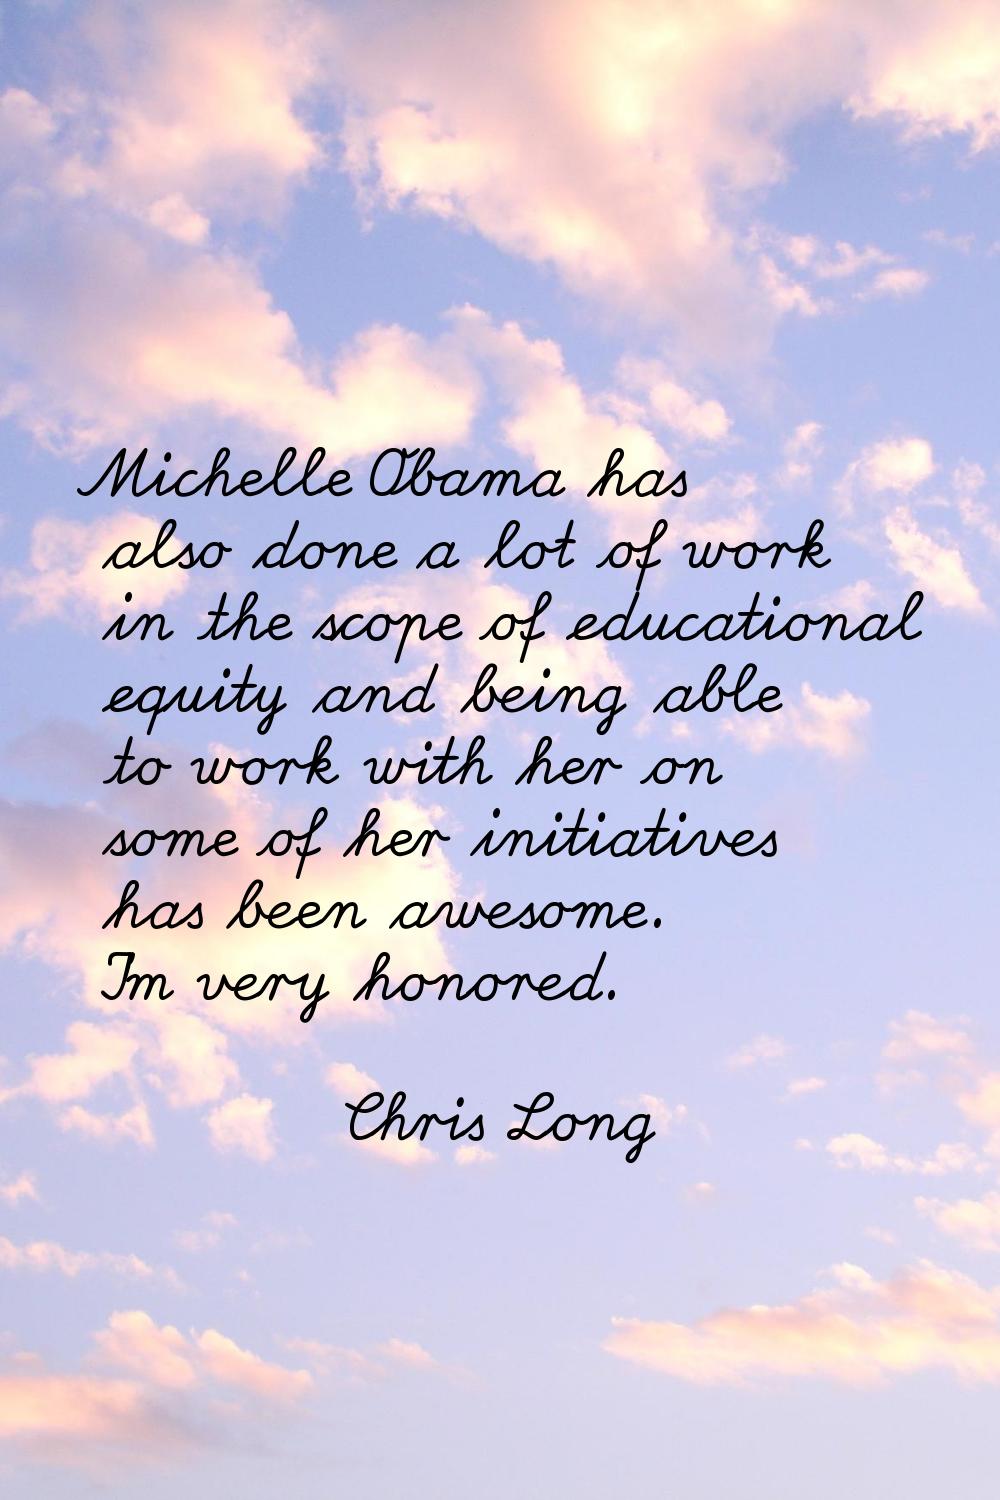 Michelle Obama has also done a lot of work in the scope of educational equity and being able to wor